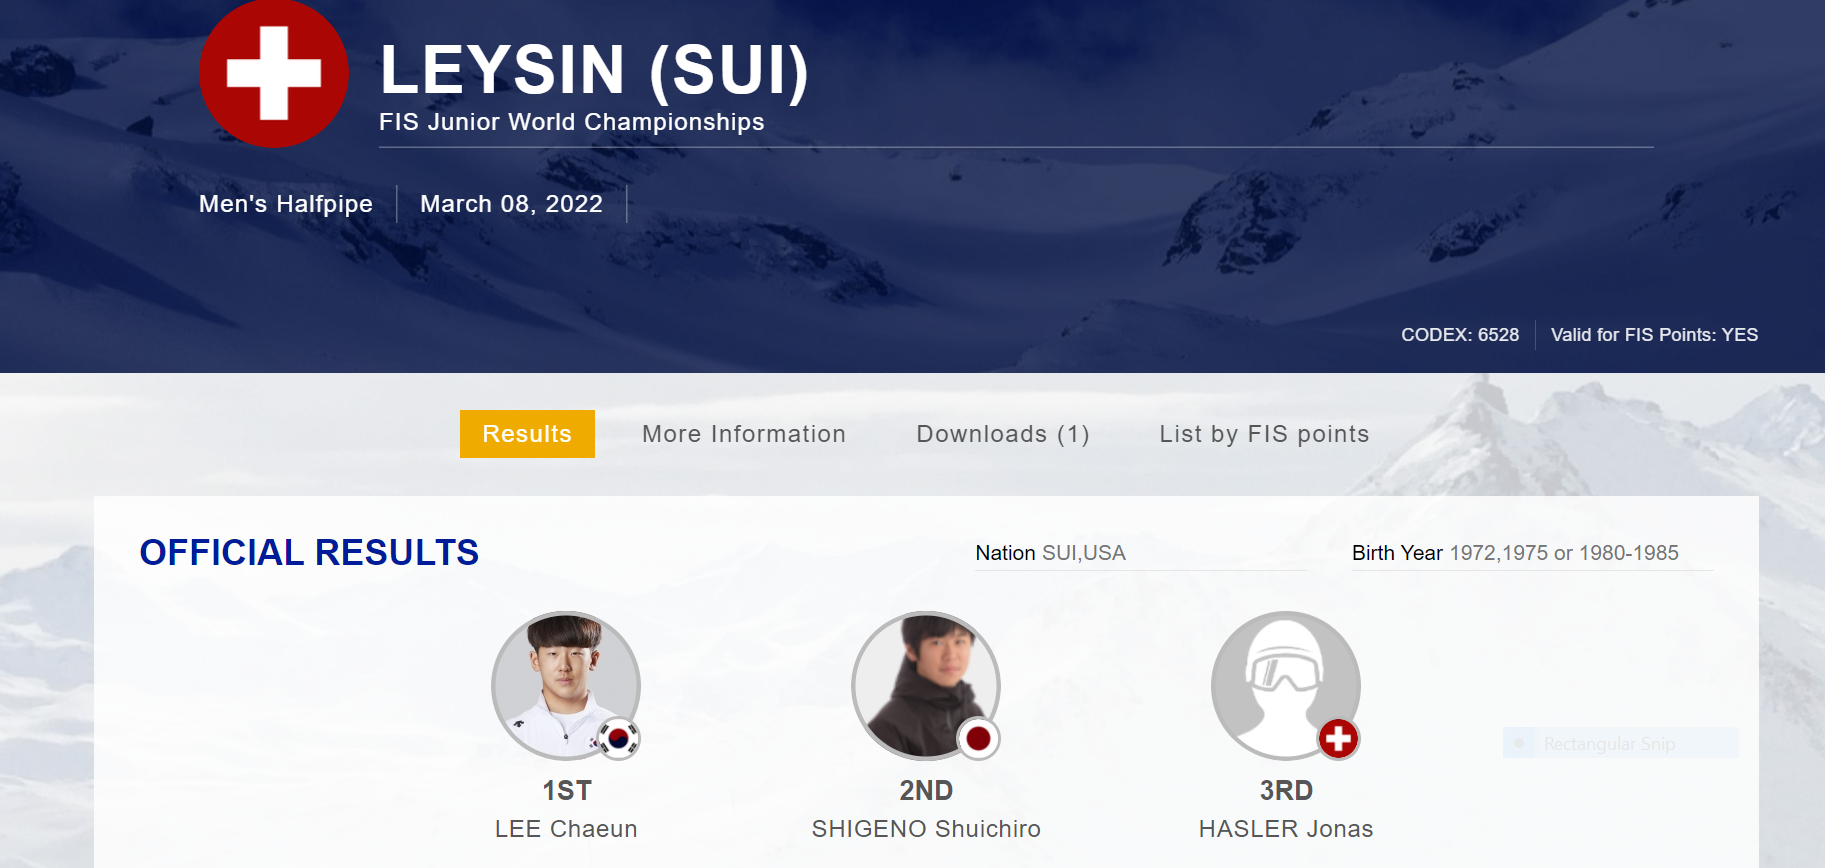 Lee Chaeun of South Korea won the men's snowboard halfpipe gold at Leysin in the FIS Park and Pipe Junior World Championships ©FIS